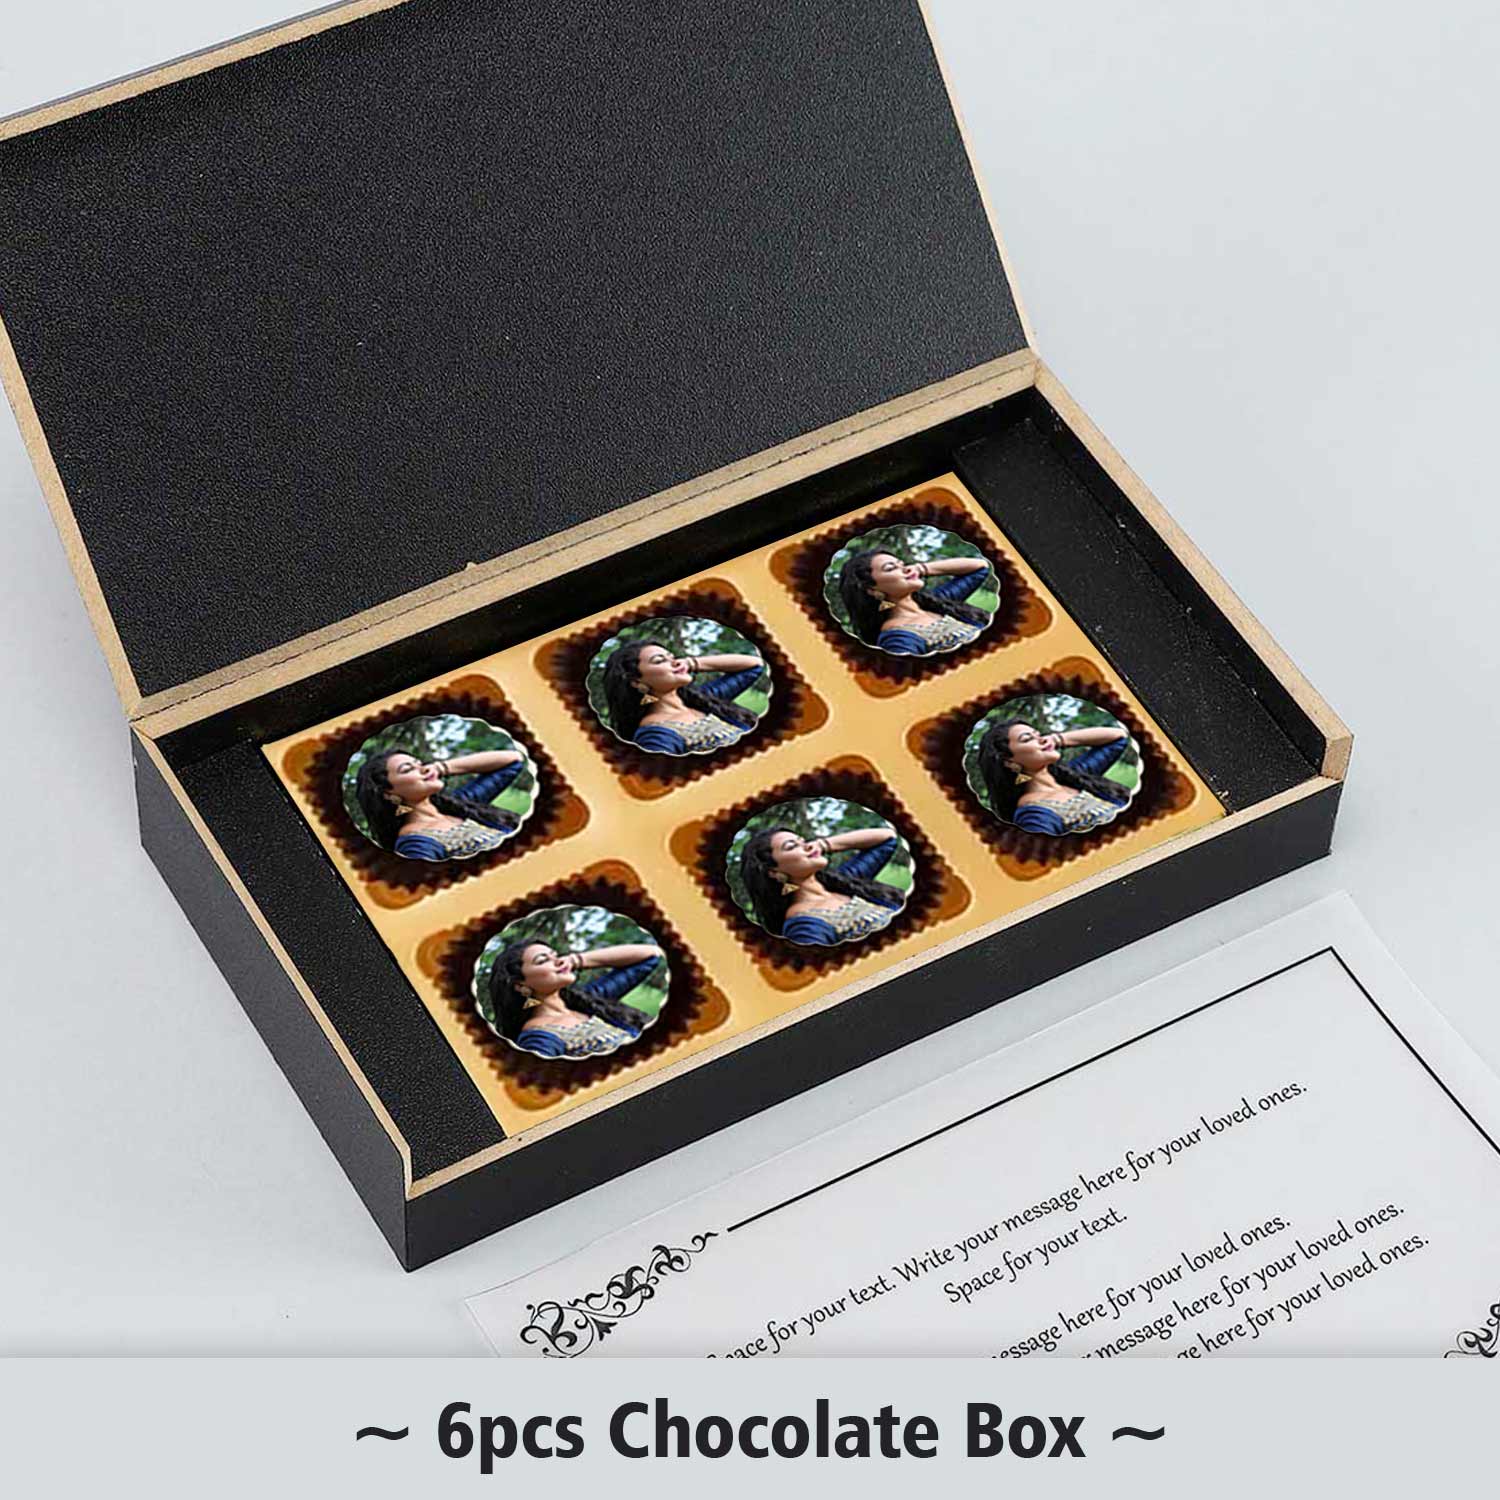 Customised box of chocolates with beautiful design printed on it